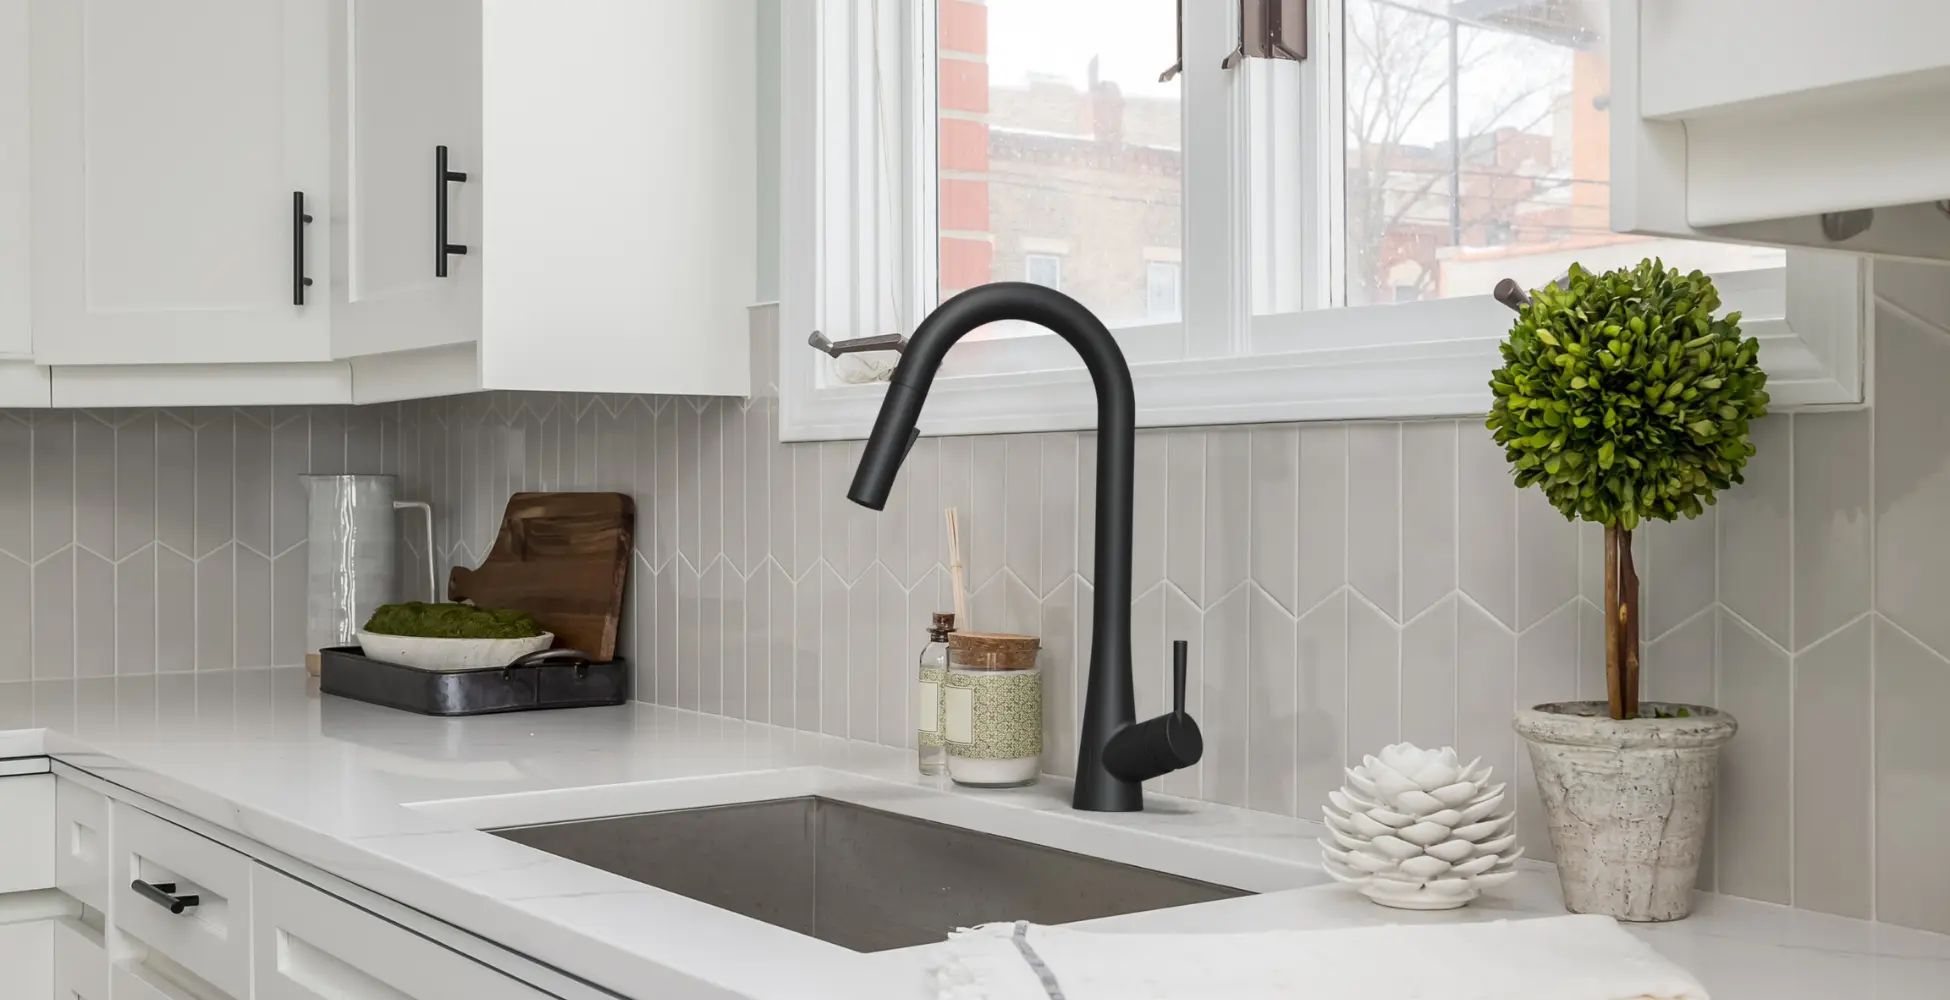 Olympia i2 Single Handle Pull-Down Kitchen Faucet K-5025 Lifestyle Inspiration